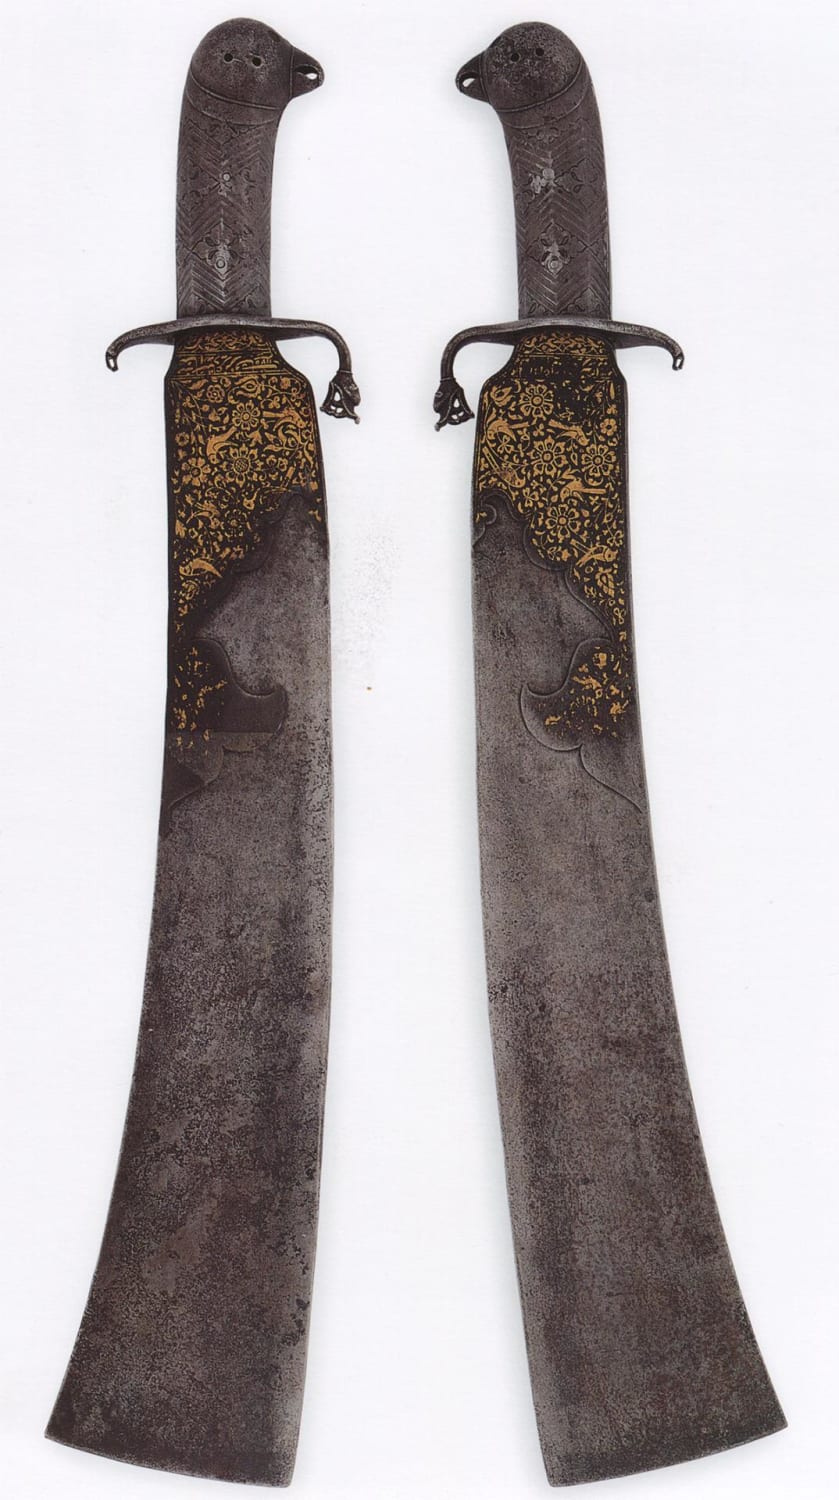 An executioner’s cleaver owned by the master Aziz the “butcher”. 1761 CE, Iran